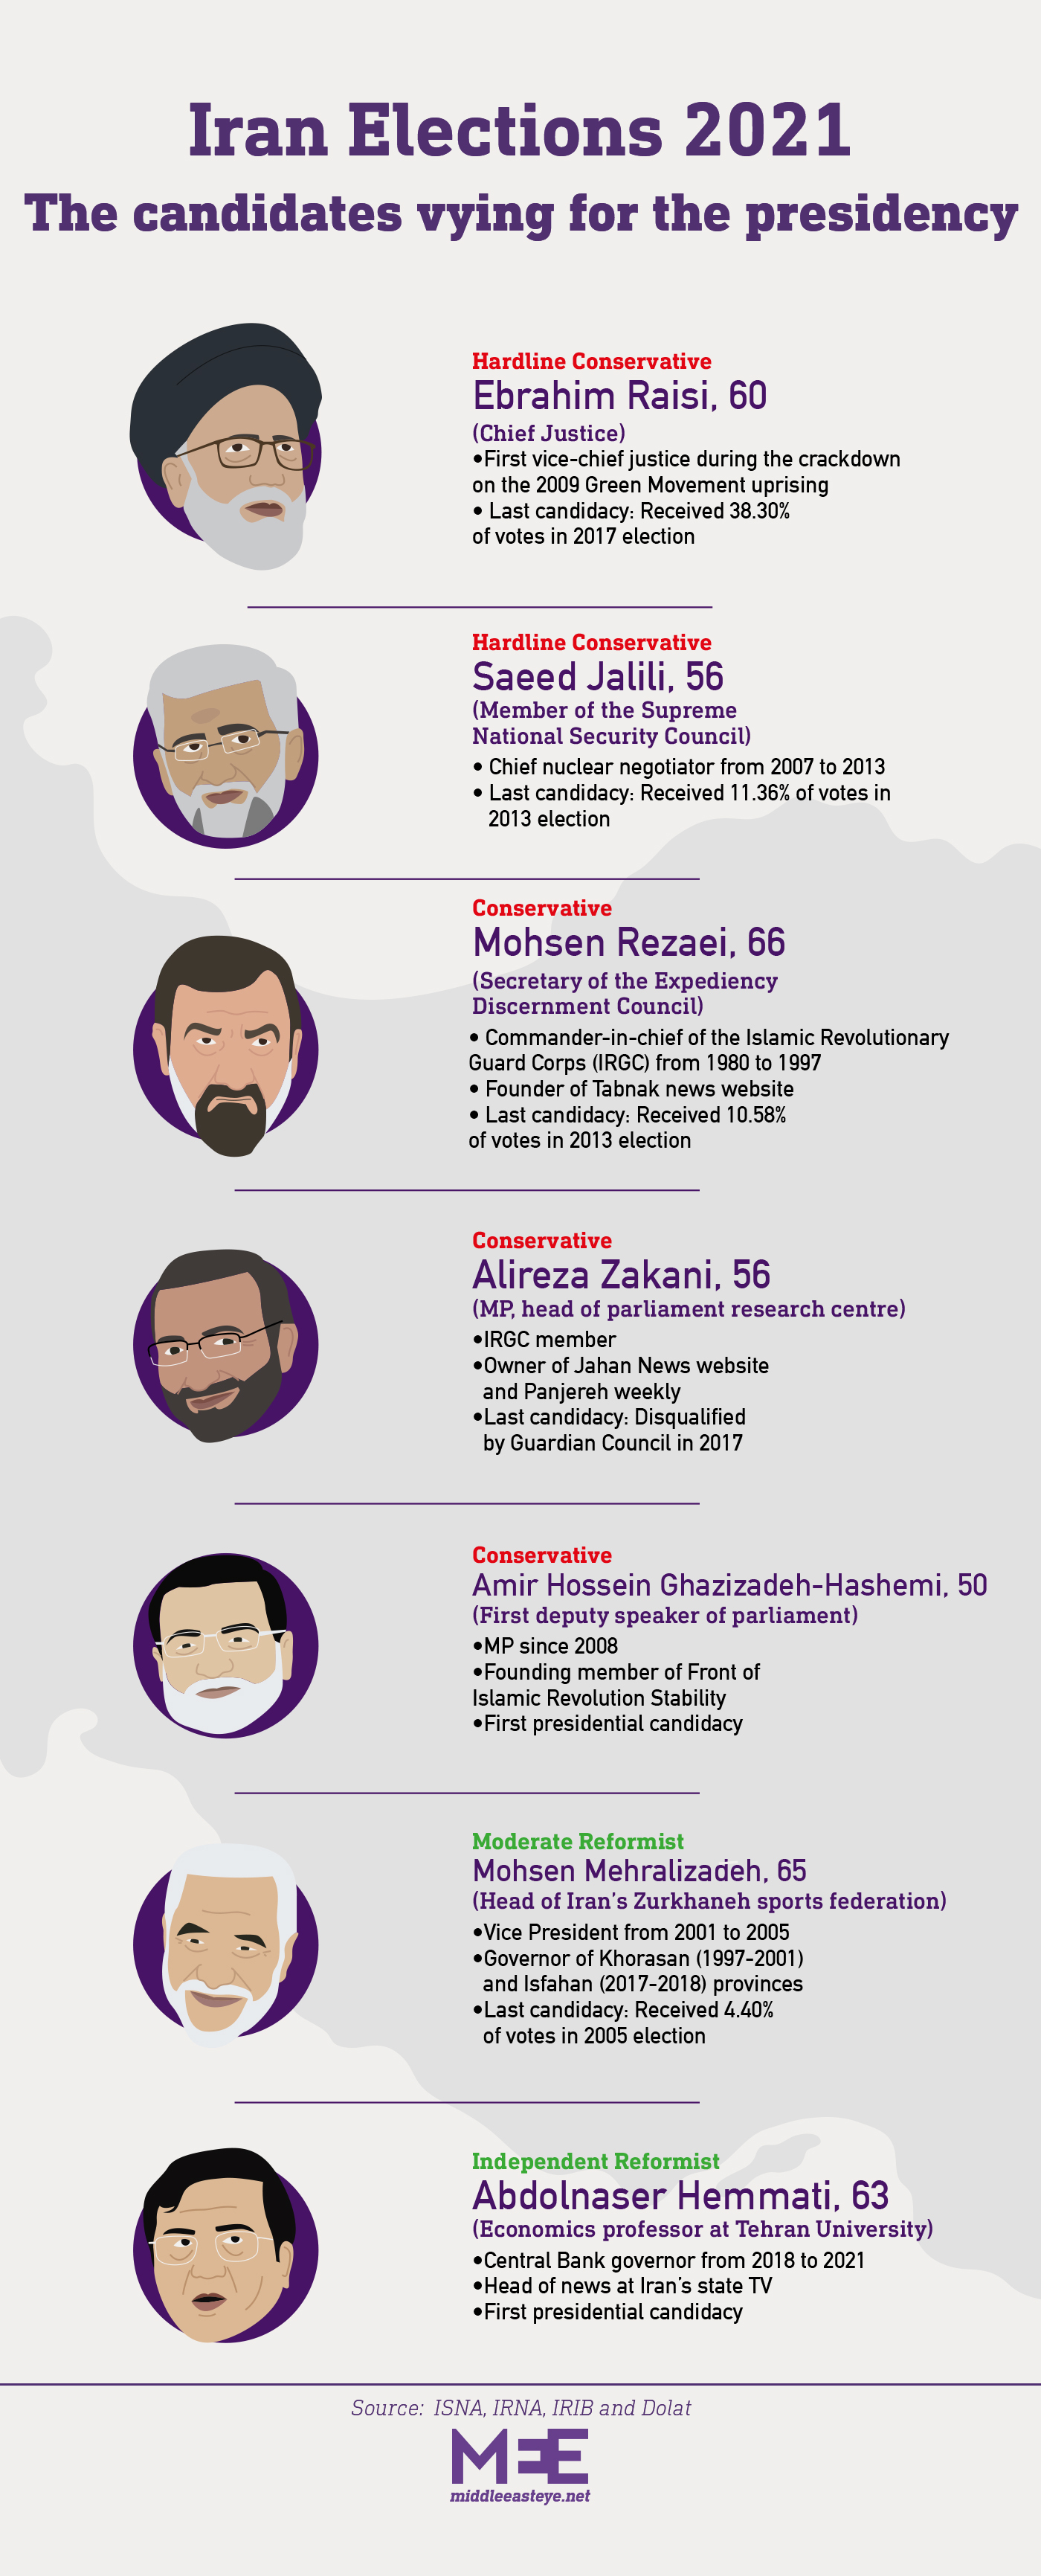 Graphic of candidates for the 2021 presidential election in Iran (MEE)